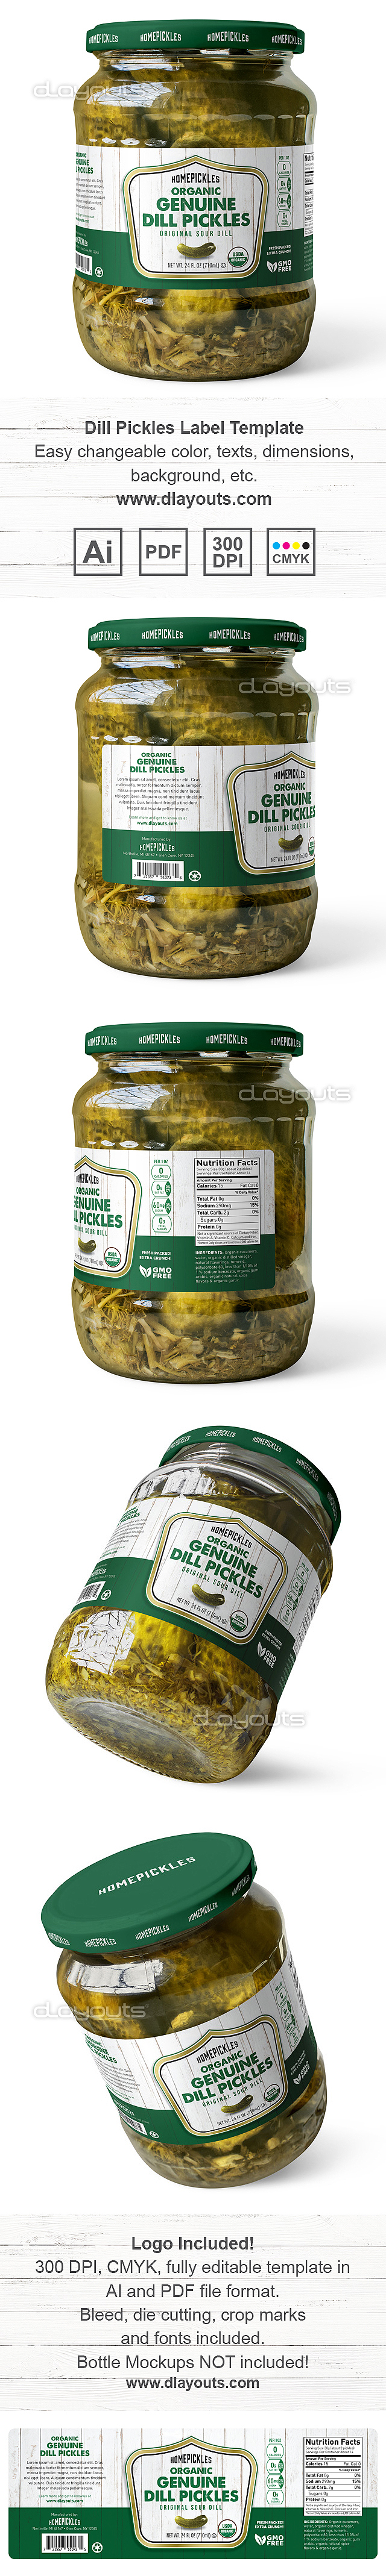 Organic Dill Pickles Label Template